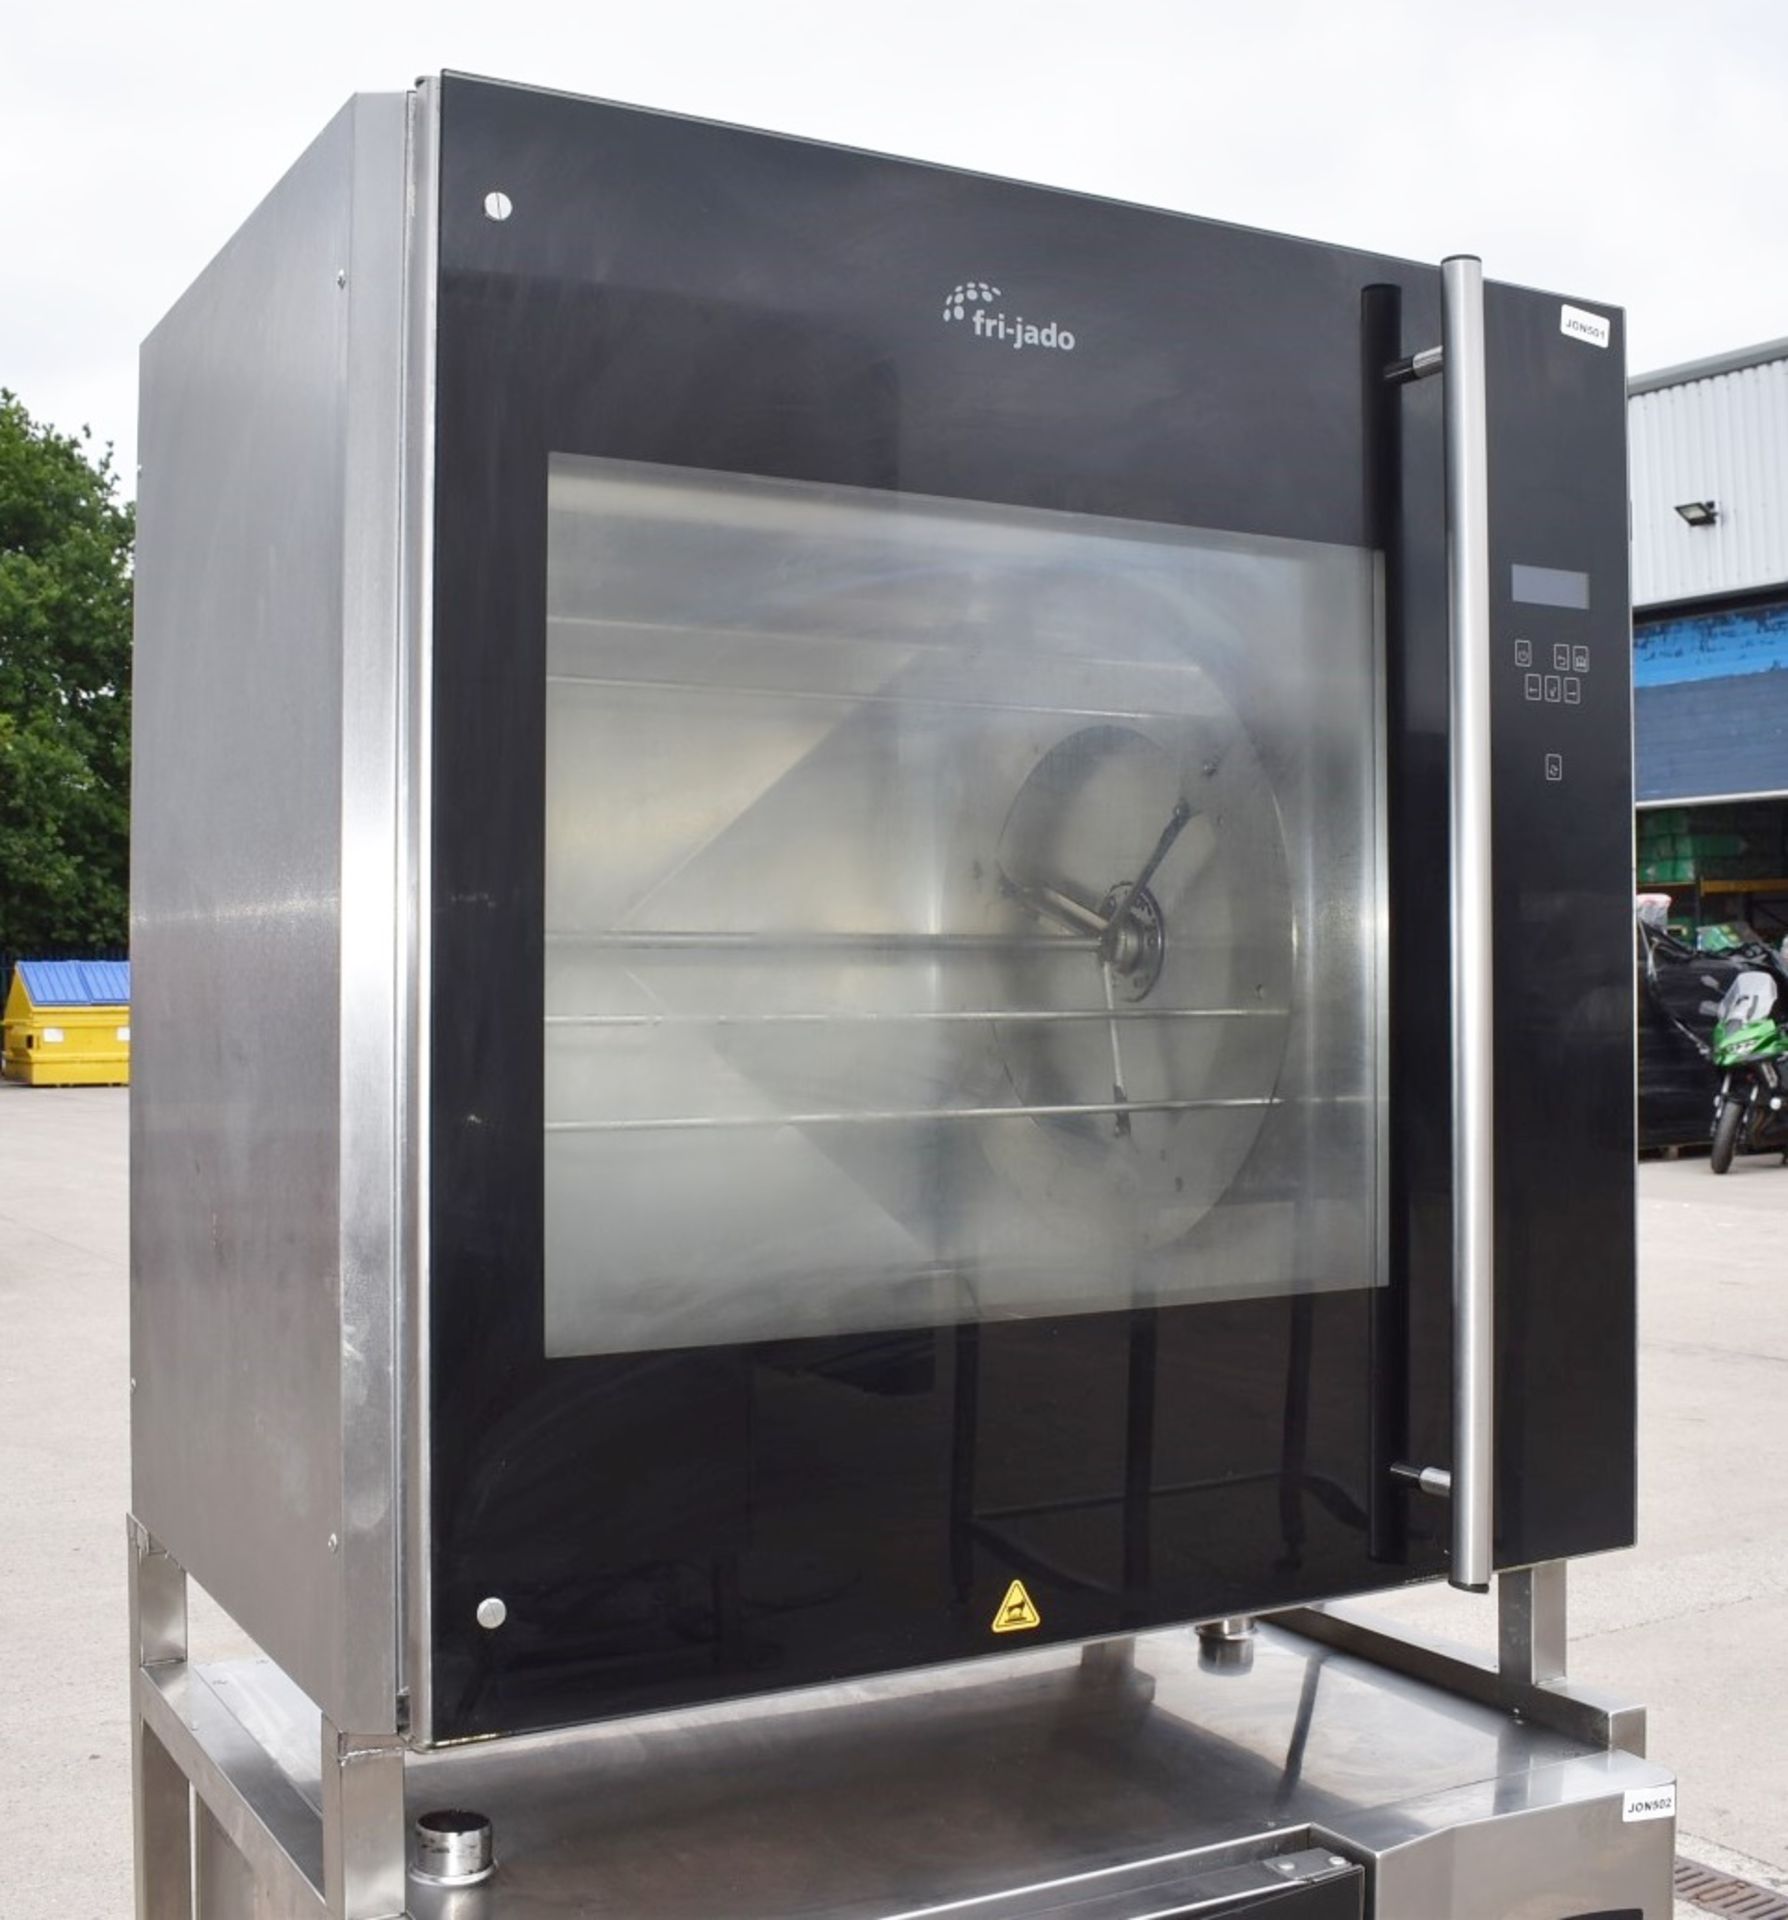 1 x Houno Electric Combi Oven and Fri-jado Rotisserie Oven Combo With Stand - 3 Phase - Image 5 of 22